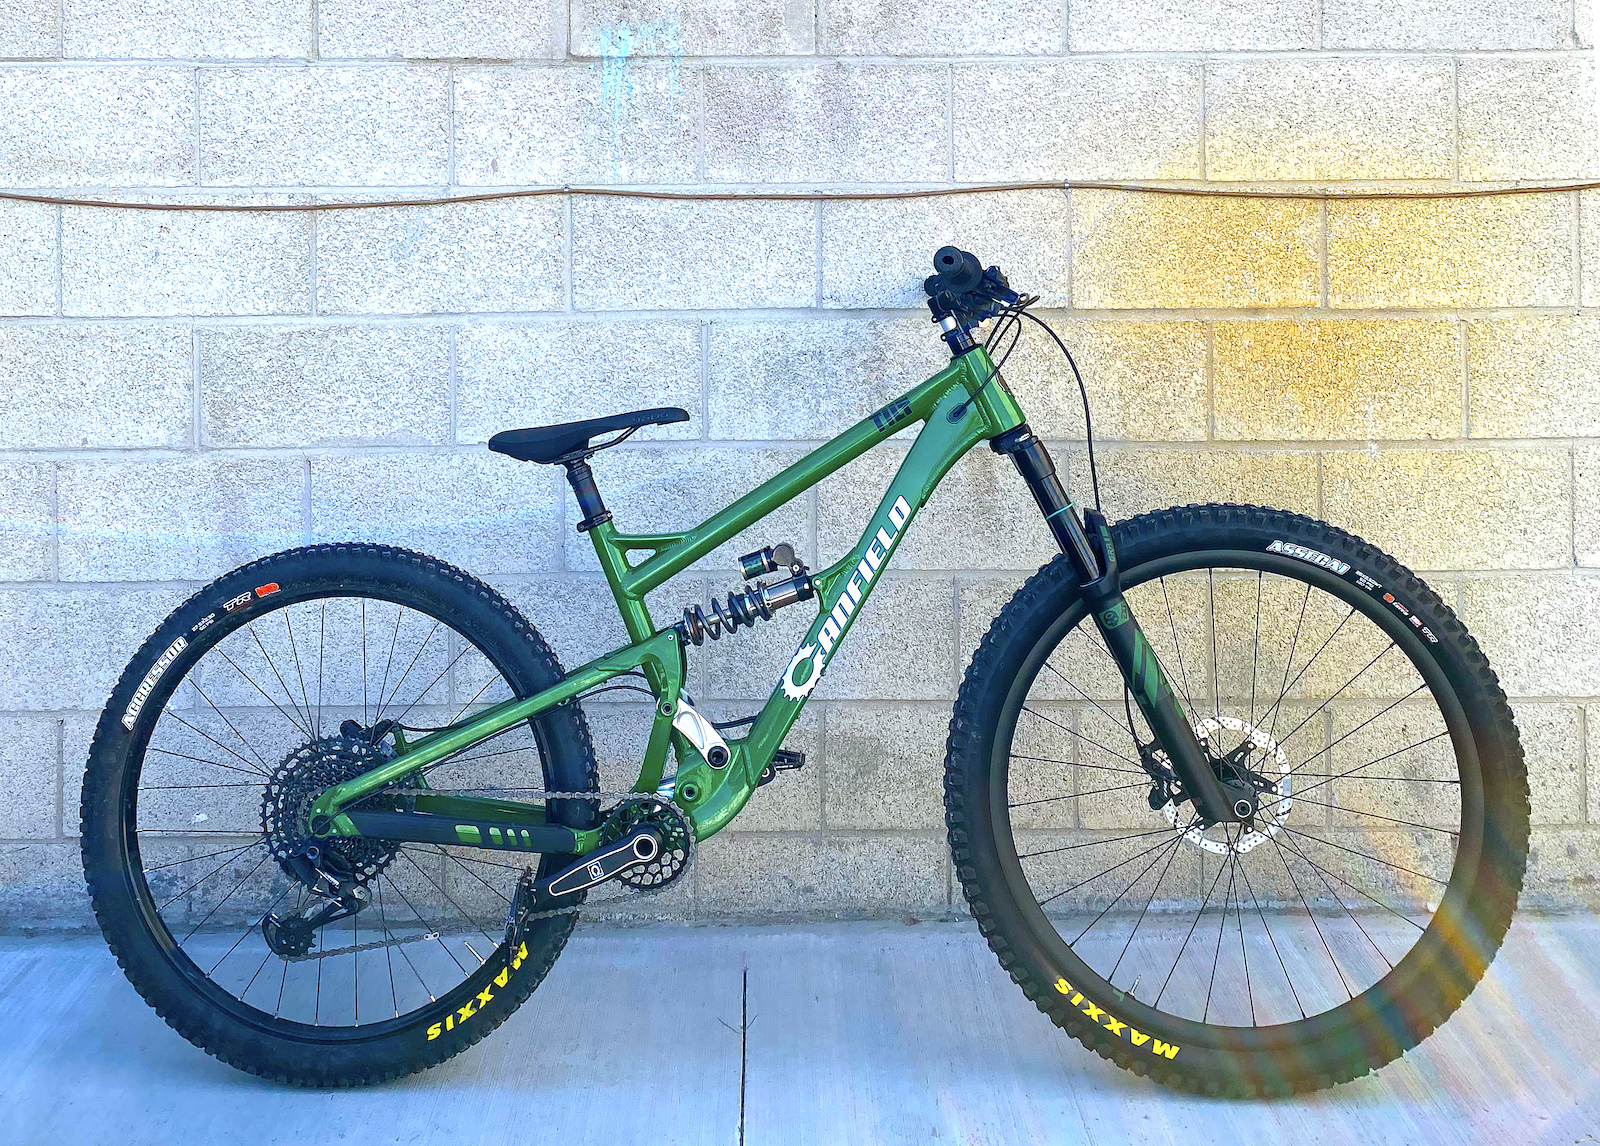 The recovered Canfield Tilt prototype with EXT suspension that was stolen just days earlier.